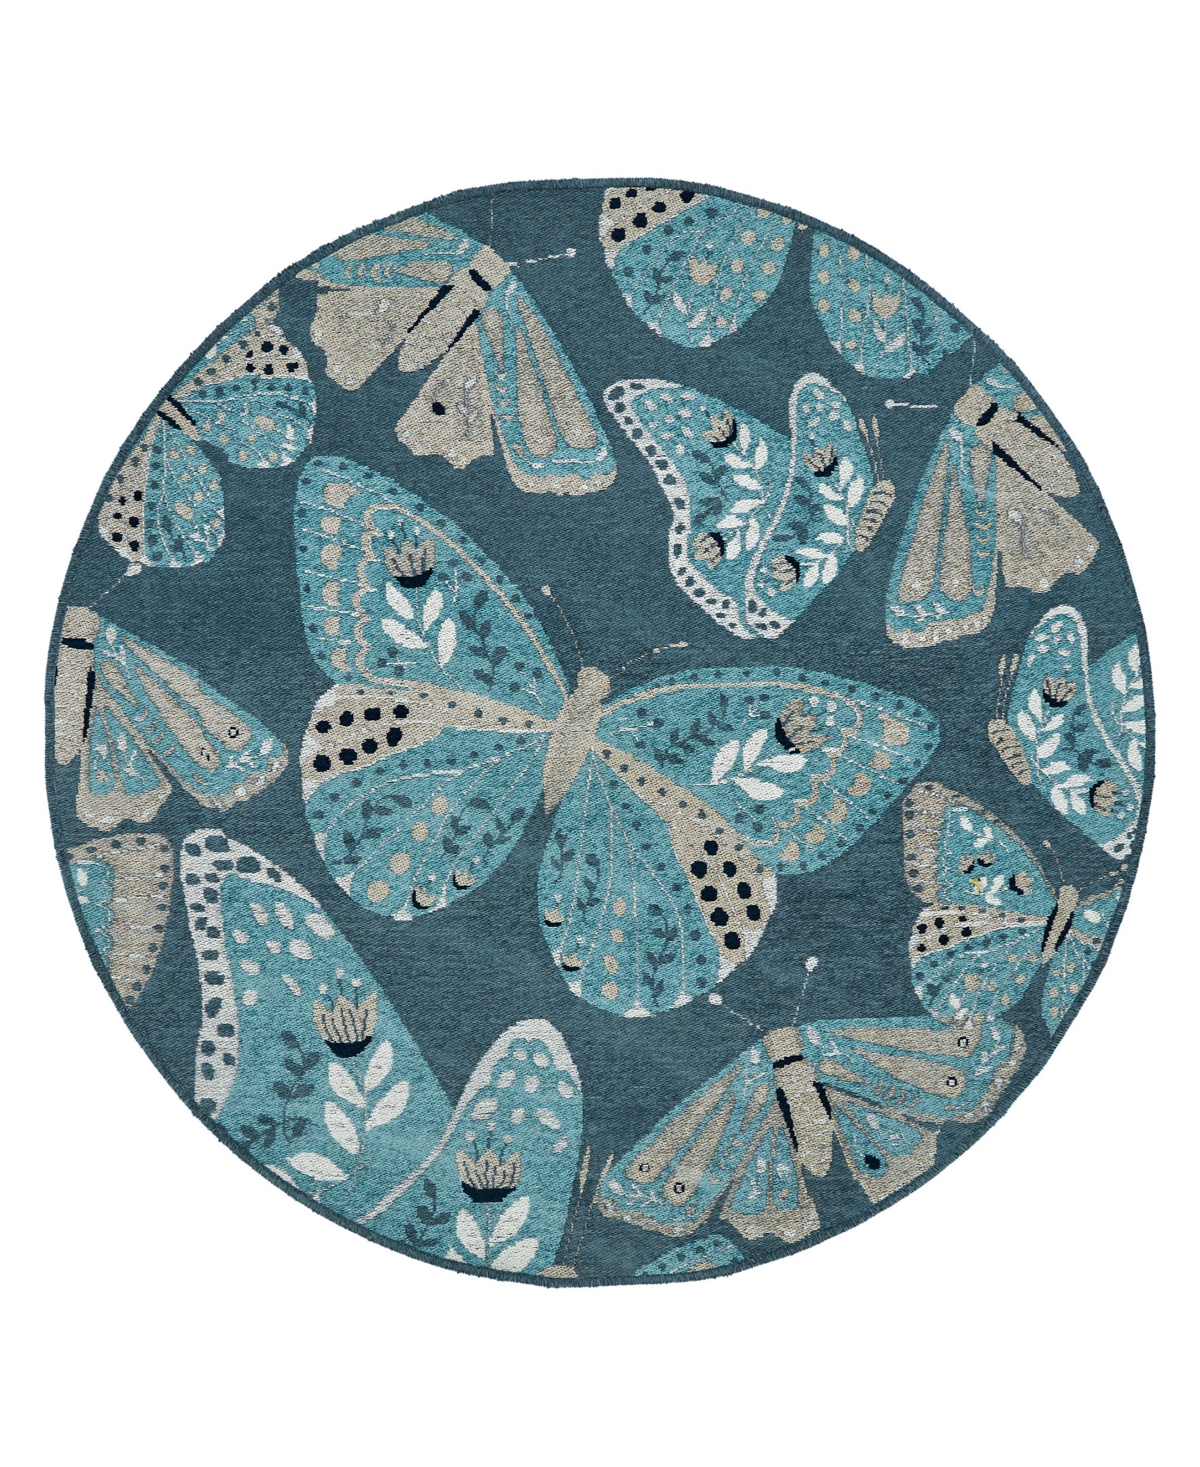 Hilary Farr Critter Comforts Hcc01-92 5' X 5' Round Area Rug In Blue